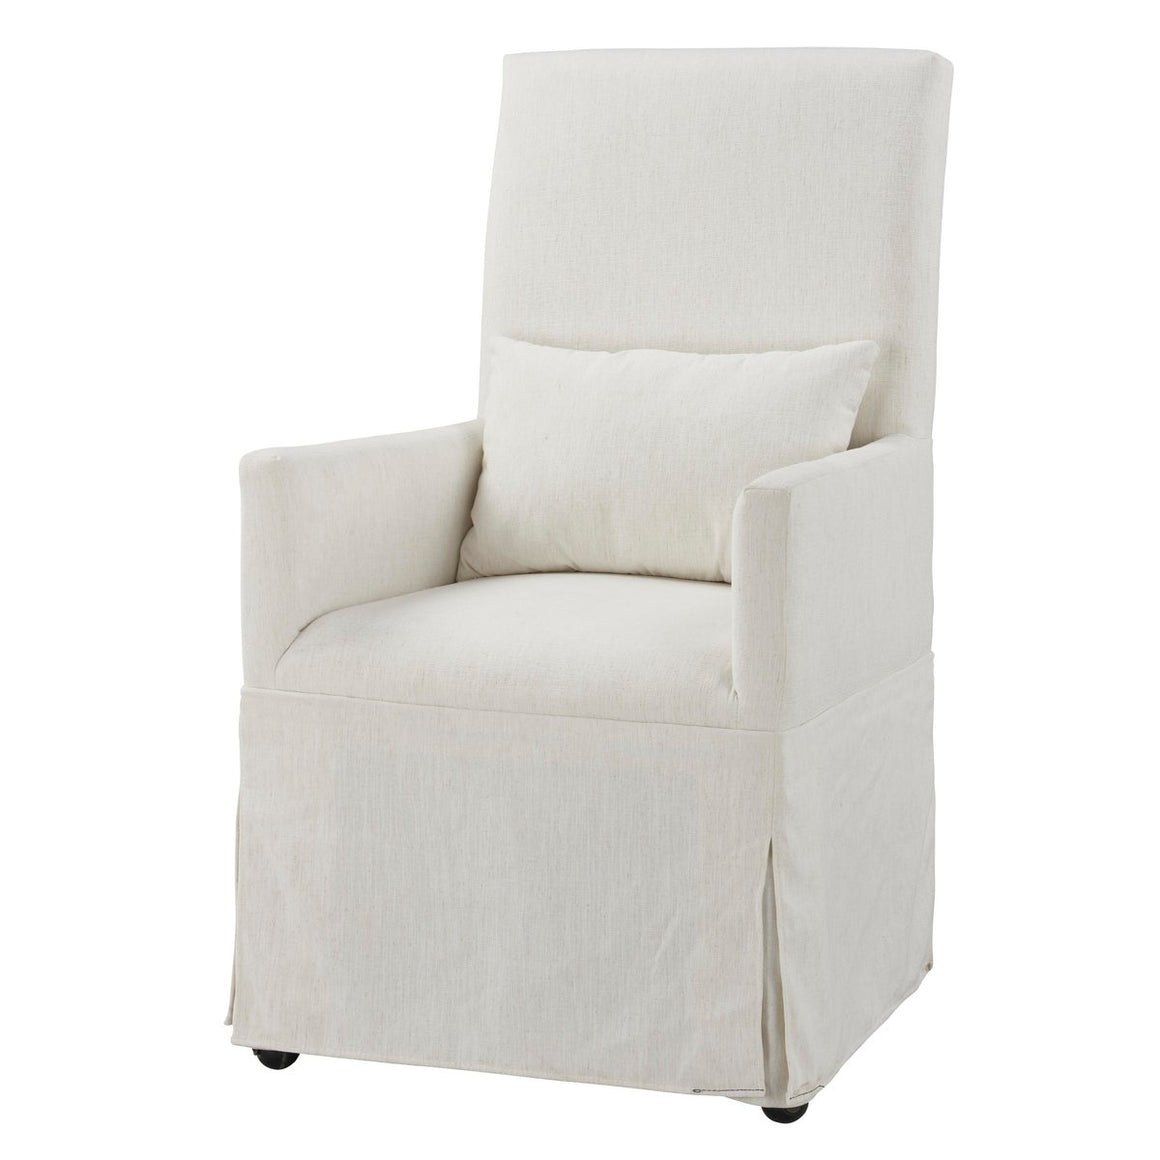 Mandy Slipcovered Arm Chair - Washable White